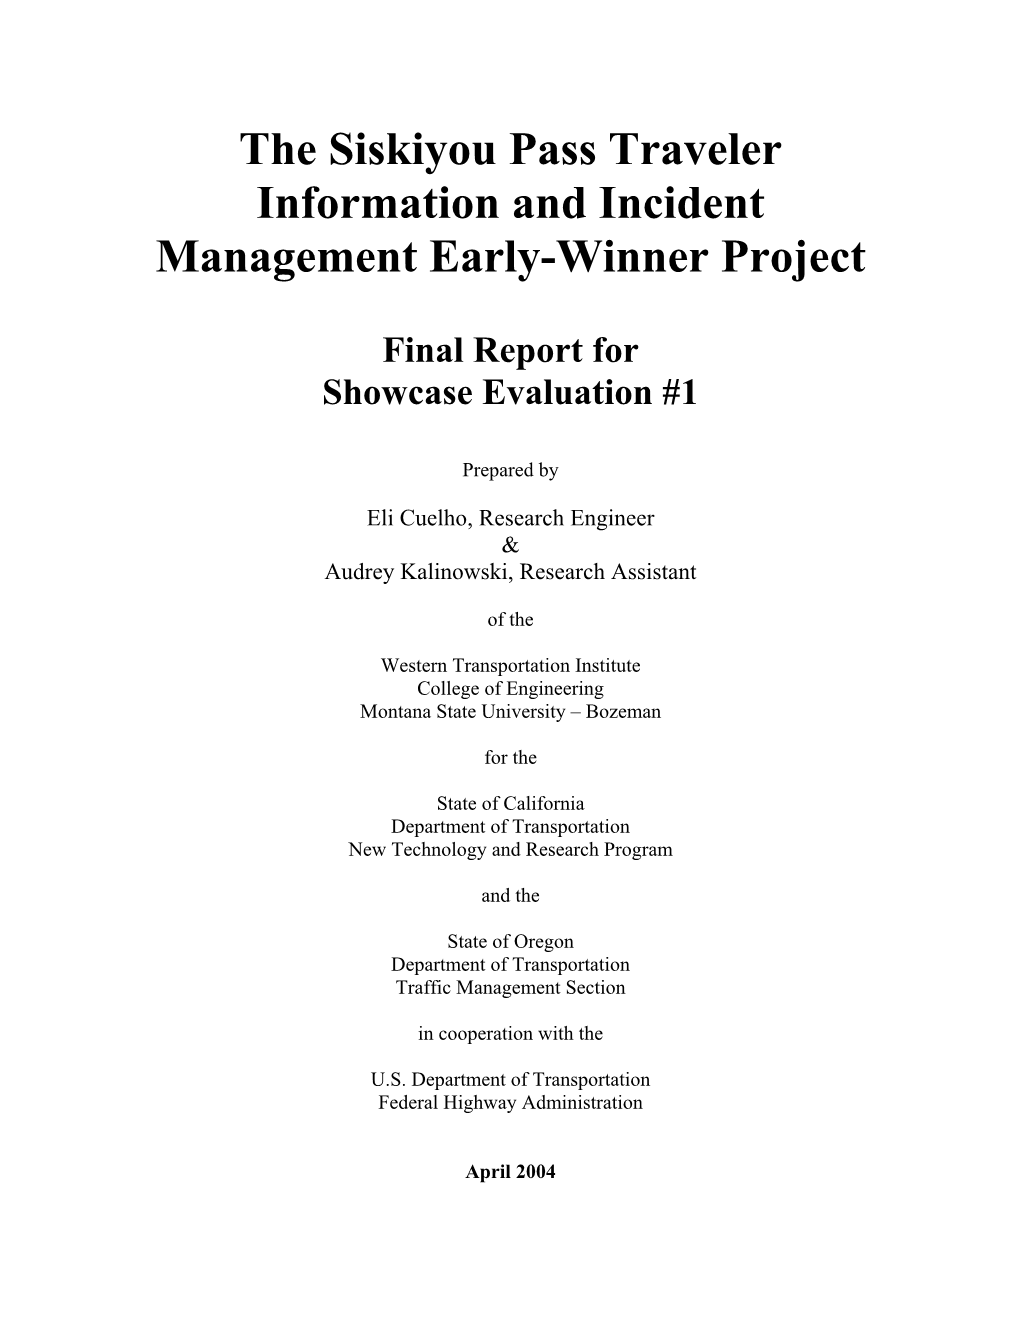 The Siskiyou Pass Traveler Information and Incident Management Early-Winner Project